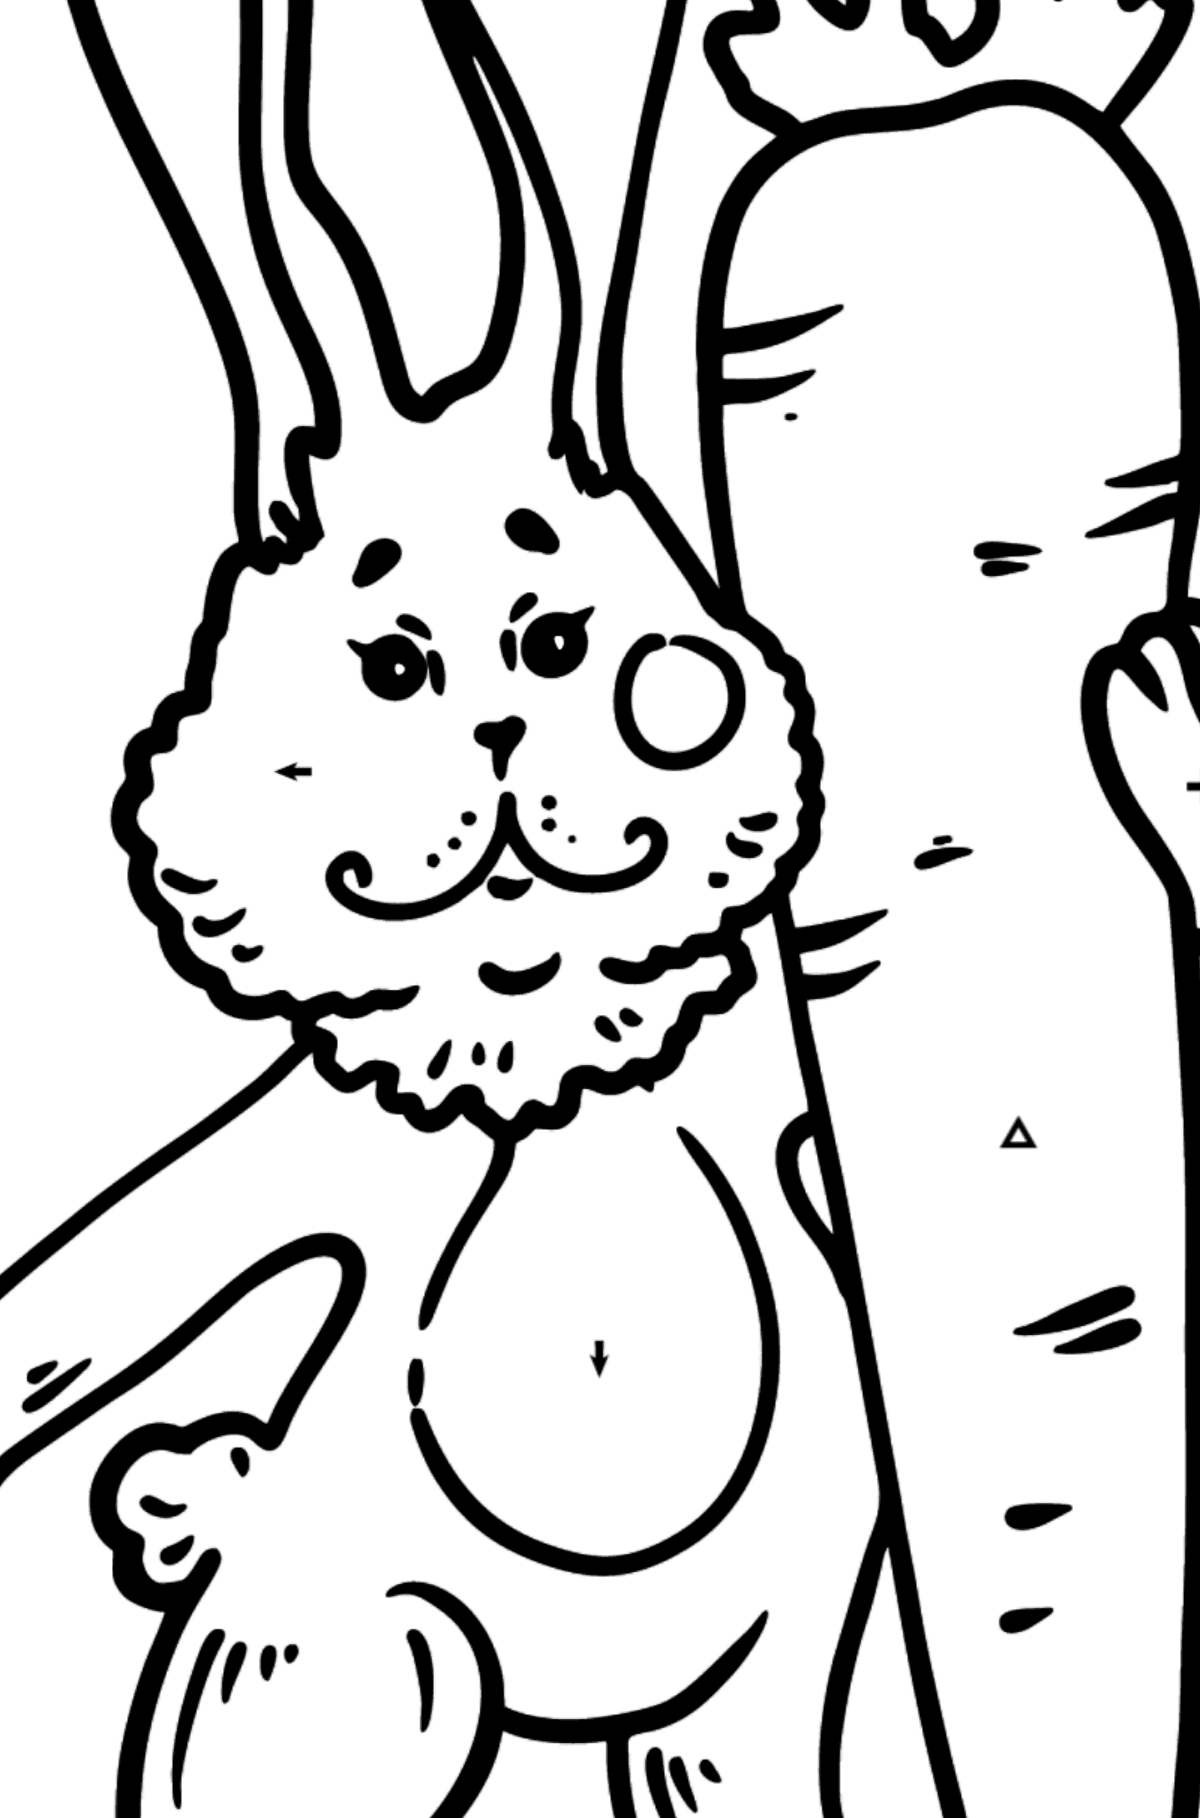 Bunny with Carrot coloring page - Coloring by Symbols for Kids